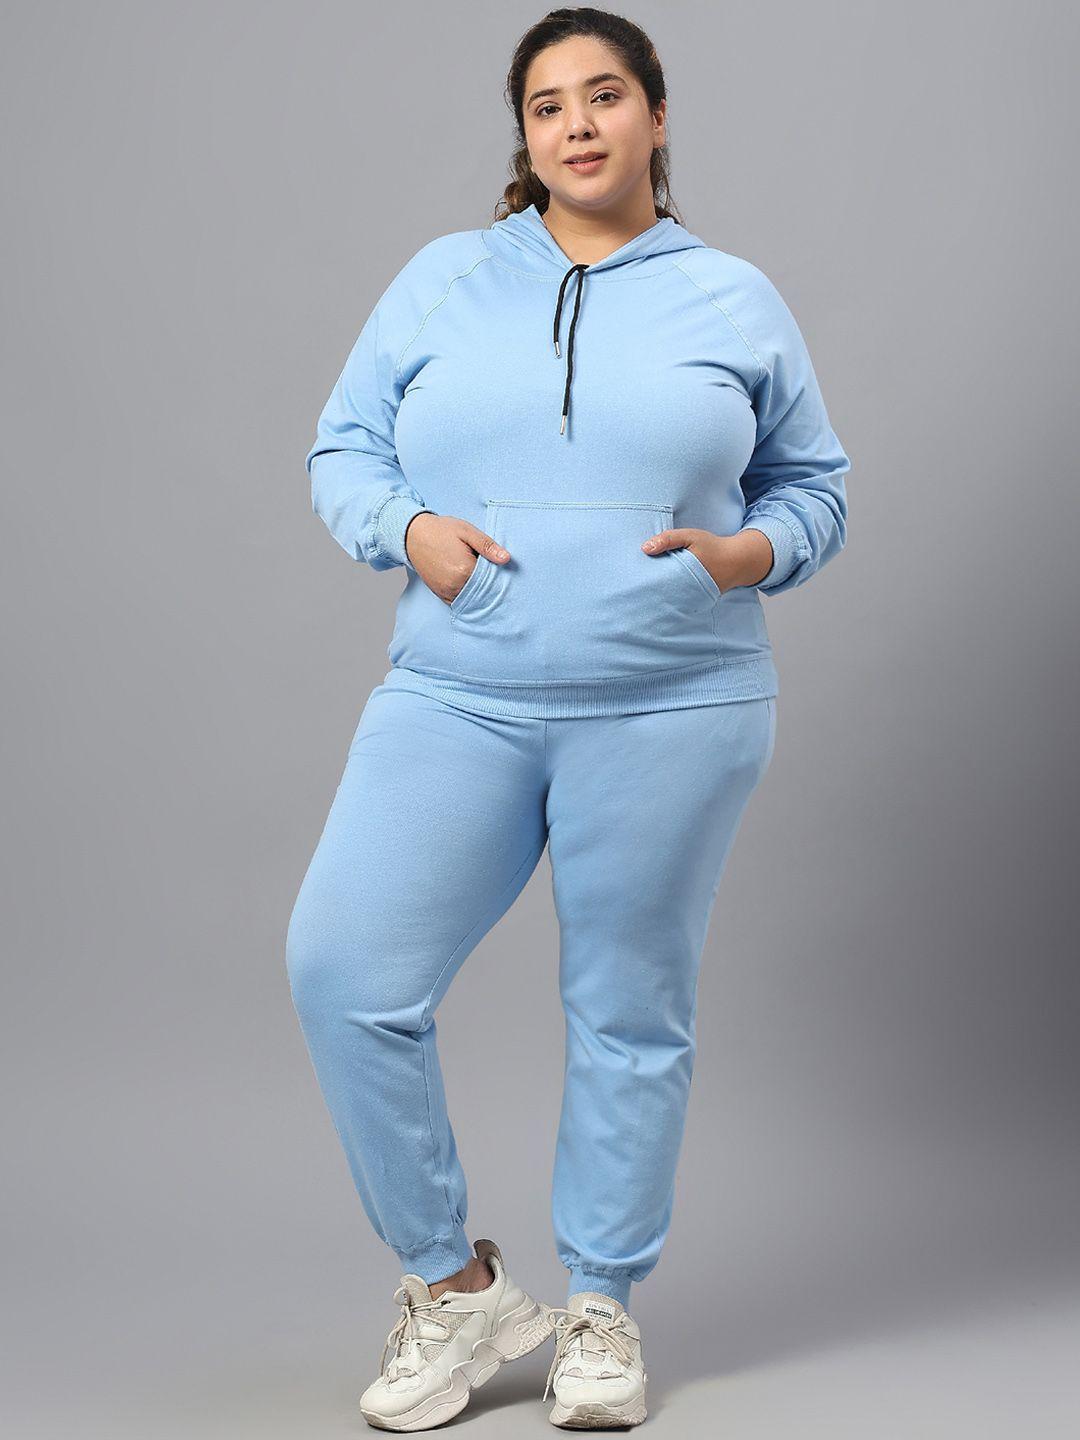 saakaa plus size cotton hooded sports tracksuits